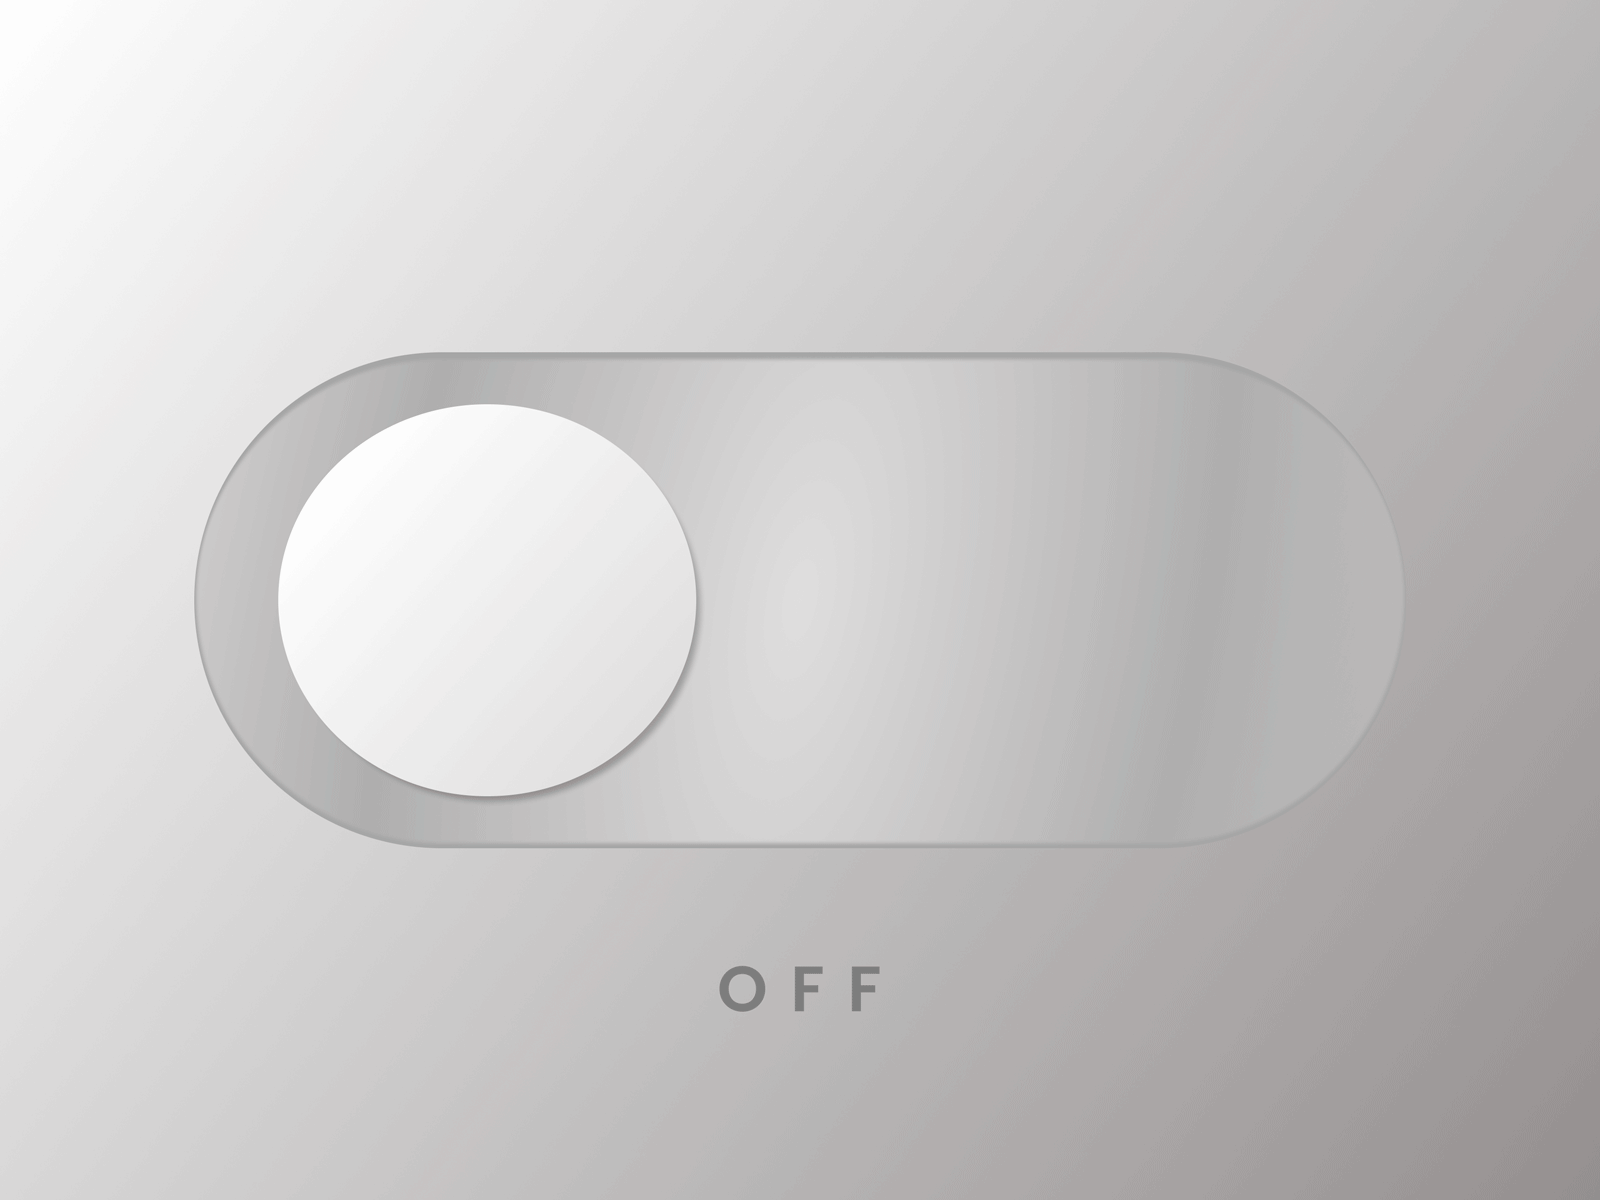 #DailyUI - On/Off Switch Design 3d app branding dailyui design graphic design icon illustration logo on off switch switch ui ux vector